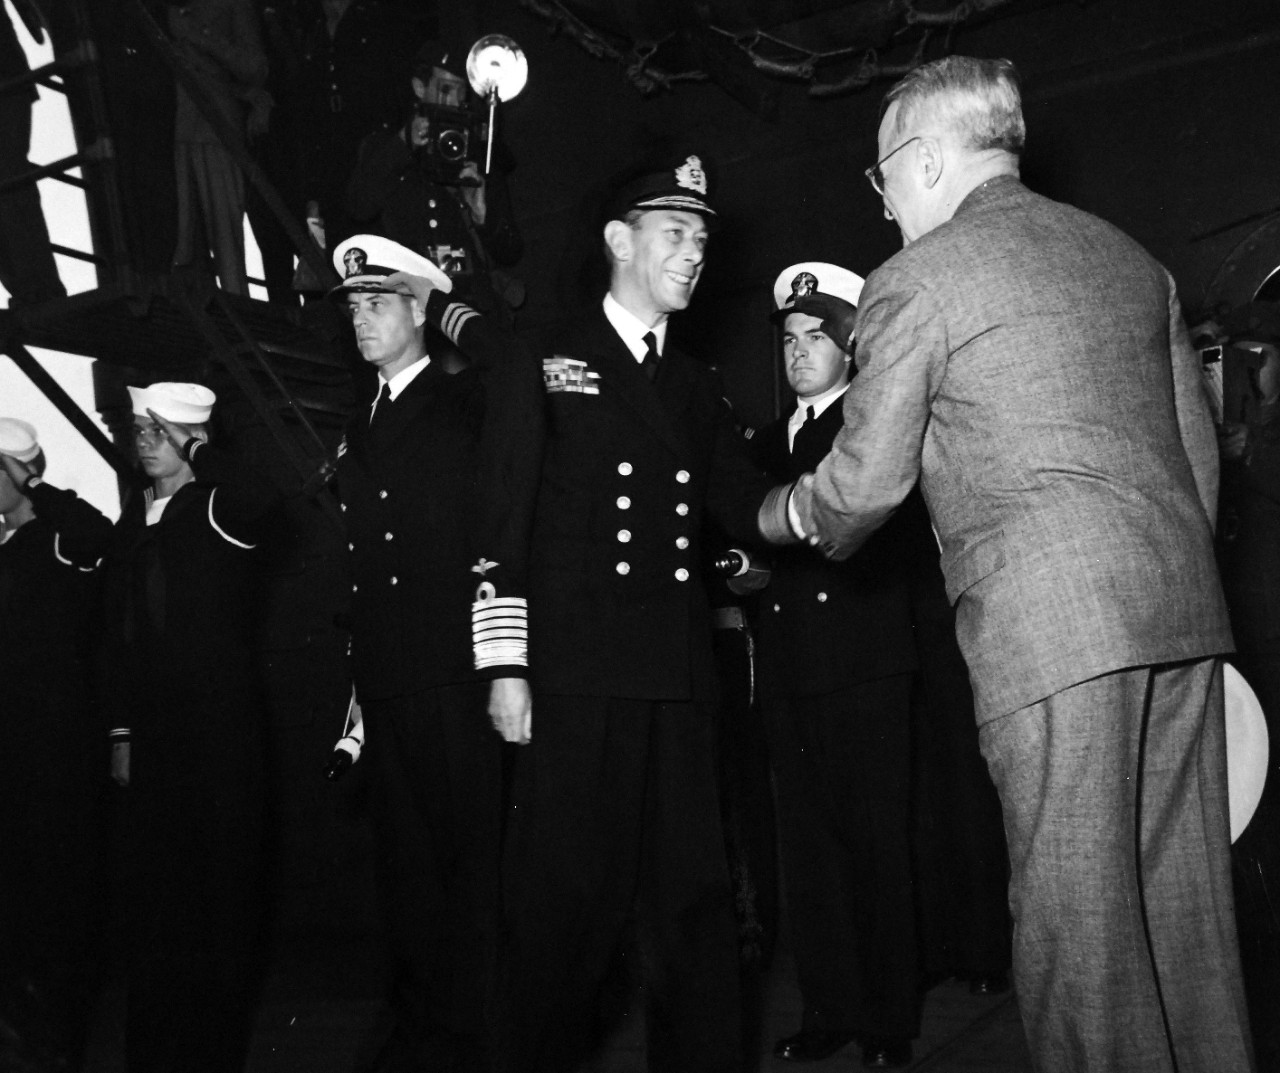 80-G-700227:  Potsdam Conference, July-August 1945. King George VI aboard USS Augusta (CA-31) for a return visit to President Harry S. Truman while the ship is in Plymouth Harbor, England.  President Harry S. Truman welcomes the king aboard.  Photograph released August 1945.  Official U.S. Navy Photograph, now in the collections of the National Archives.  (2016/02/23).